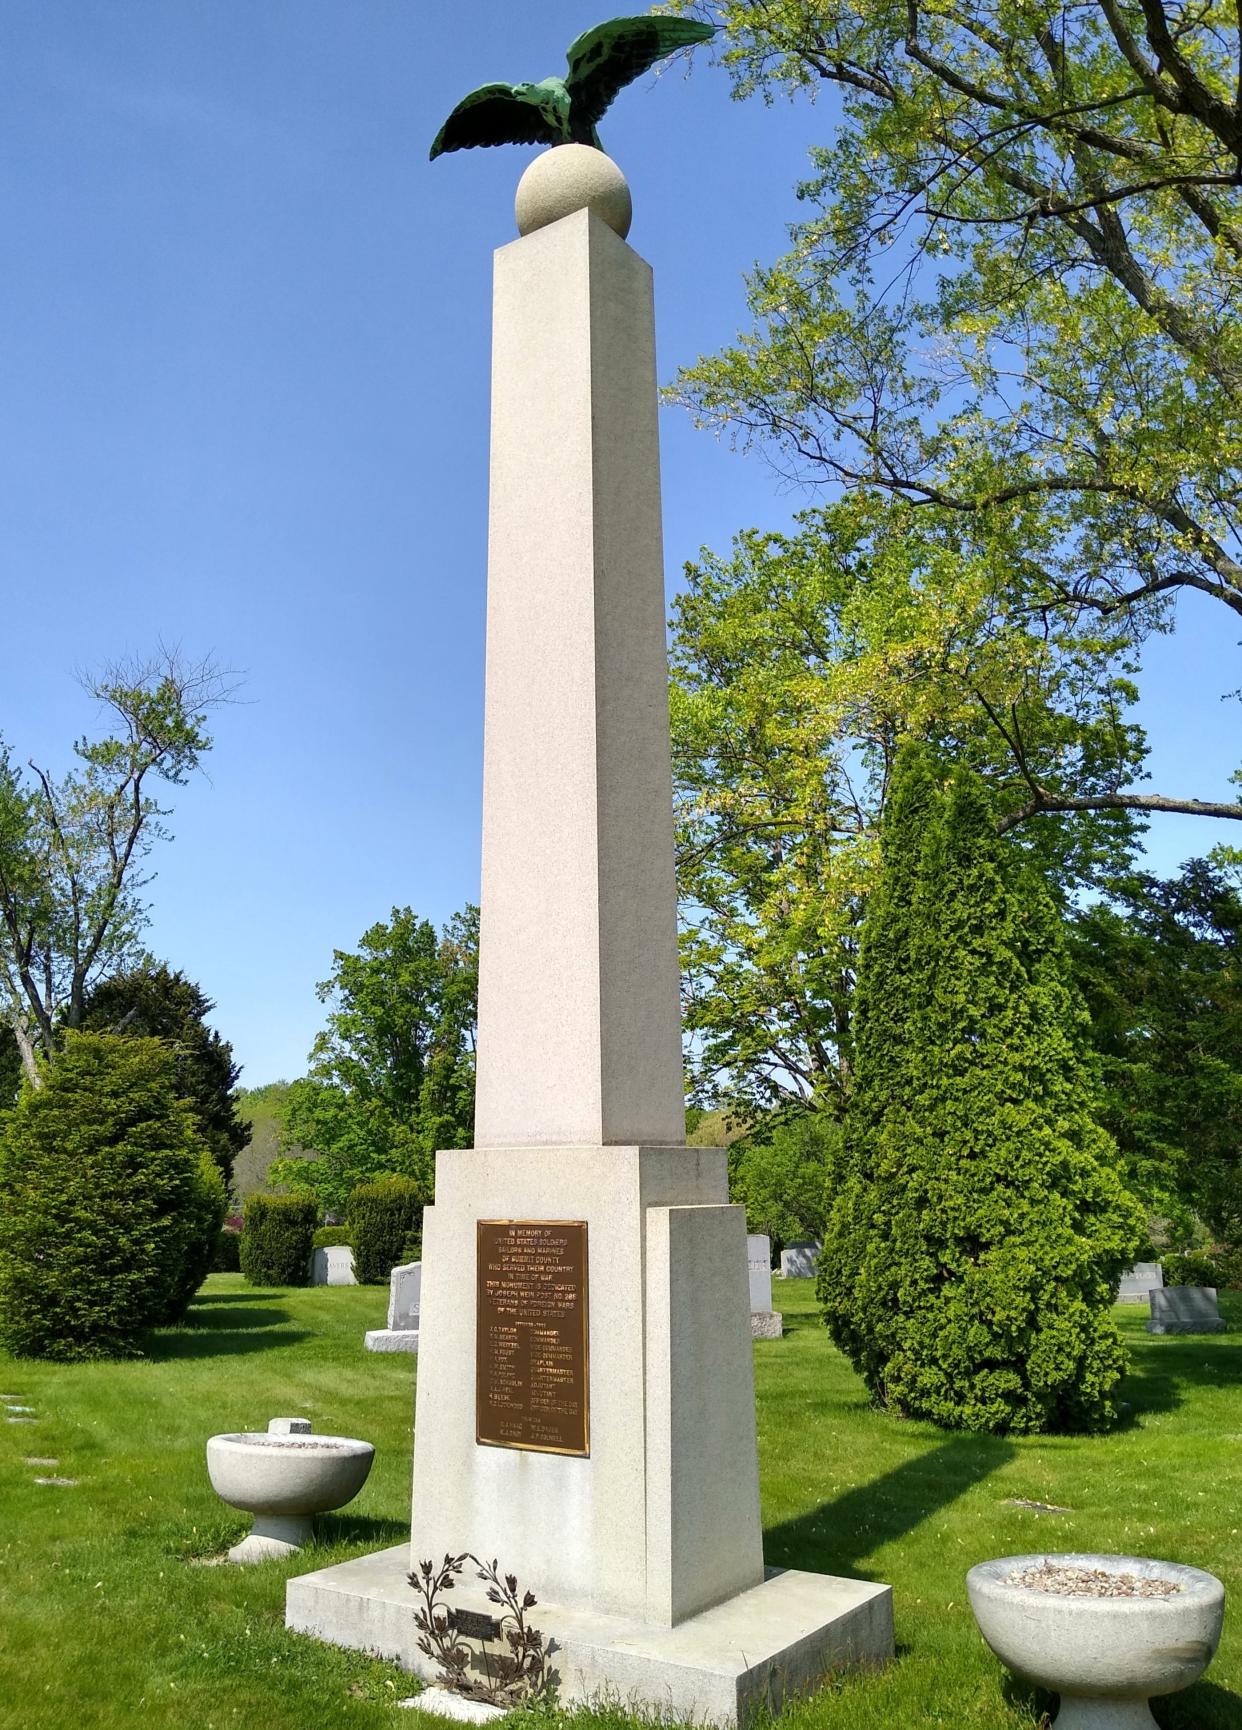 Dedicated in May 1923, a memorial to U.S. troops stands at Rose Hill Burial Park in Fairlawn.